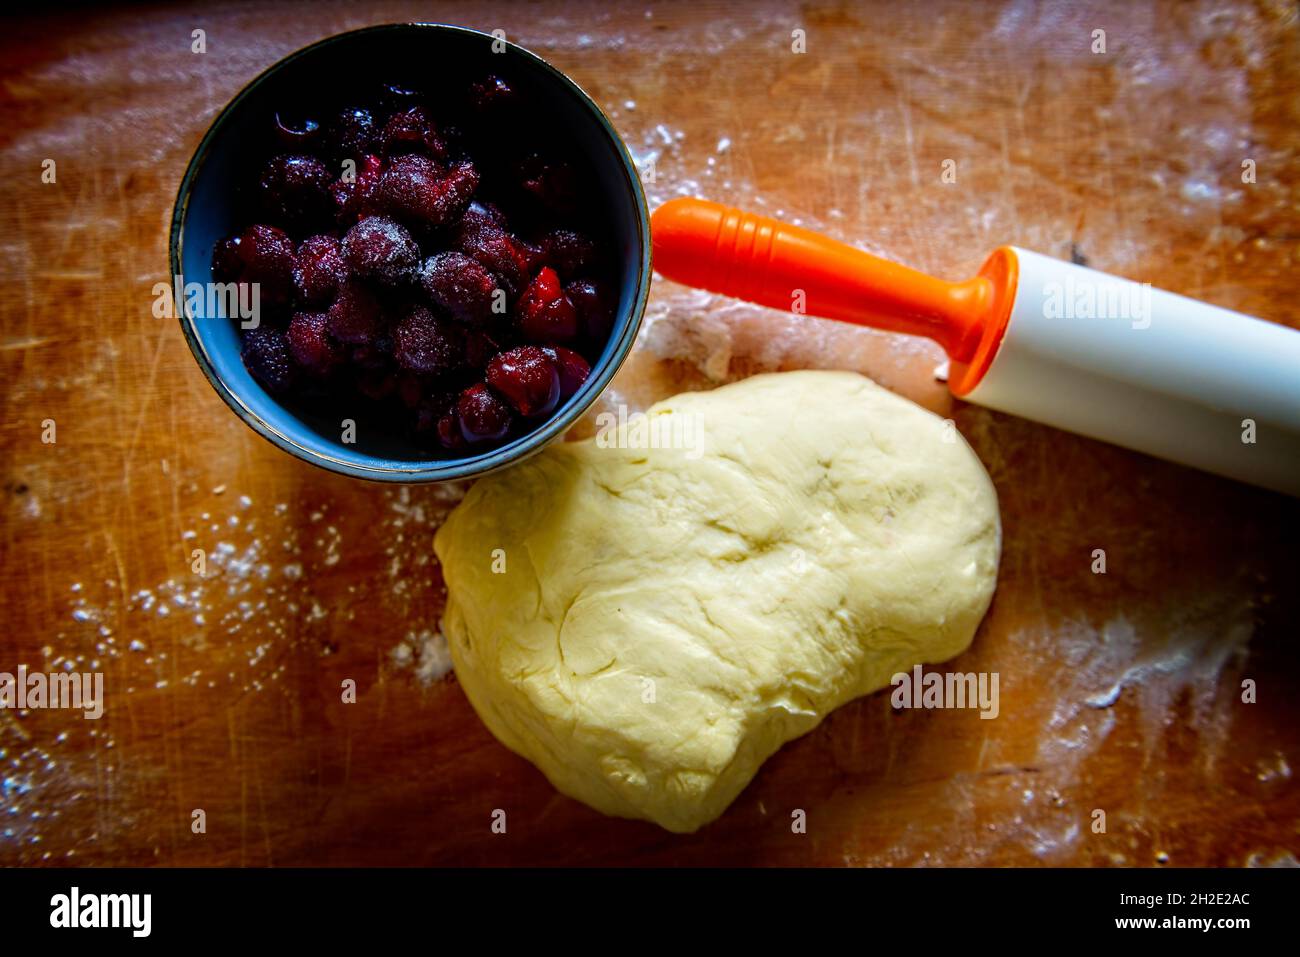 Making dumplings filled with sour cherry with sugar on a wooden cutting board Stock Photo